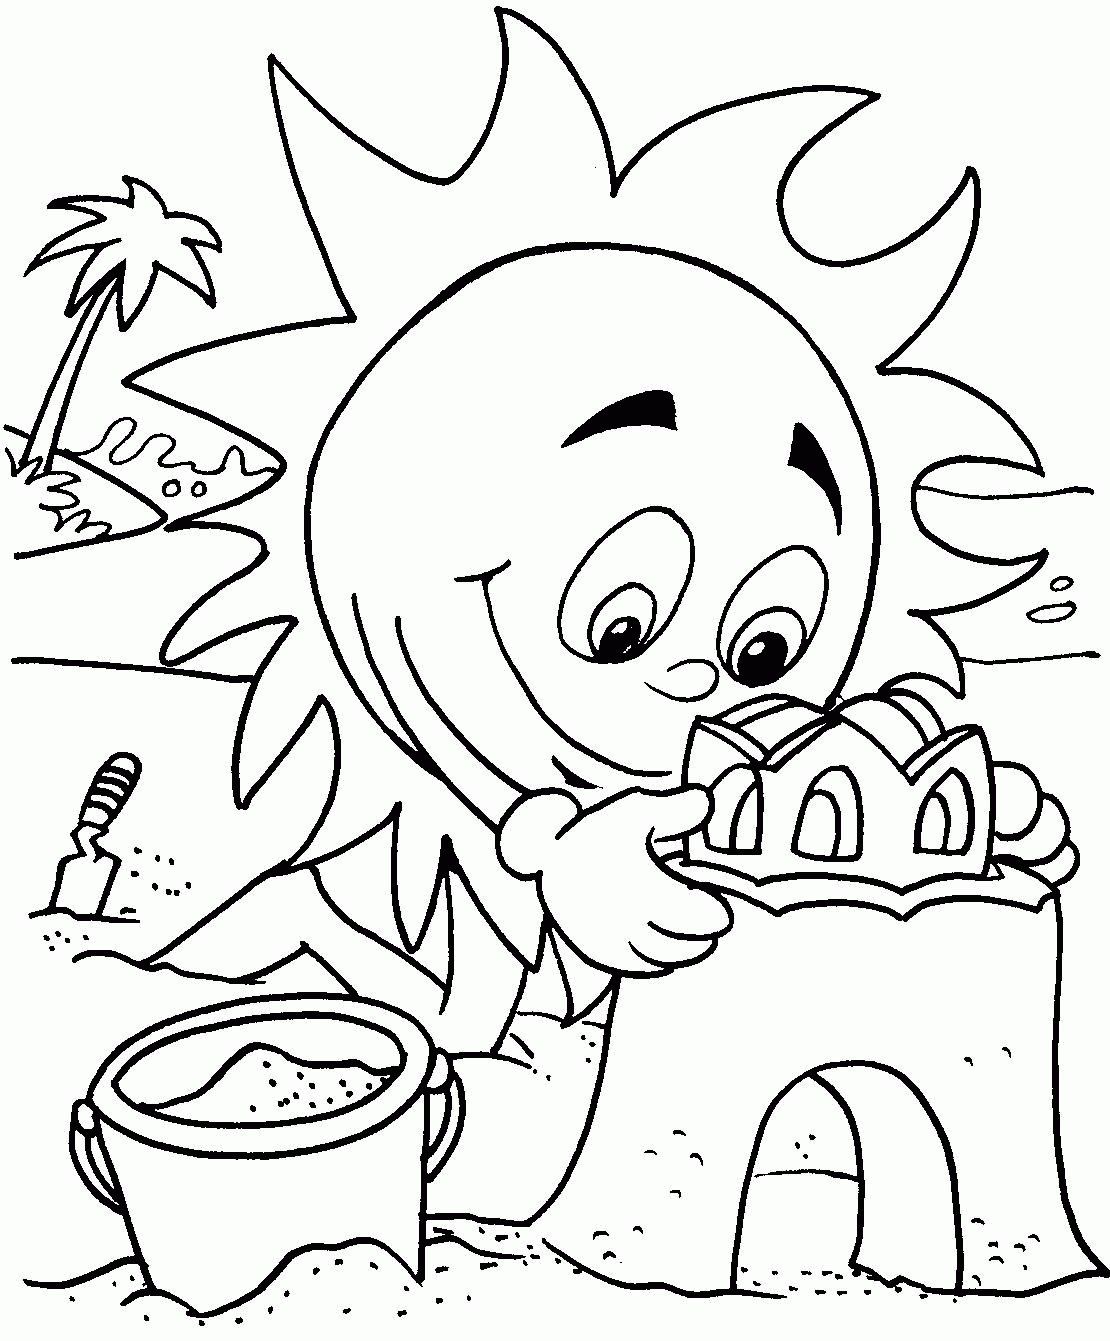 Summer Coloring Pages and Book | Unique Coloring Pages